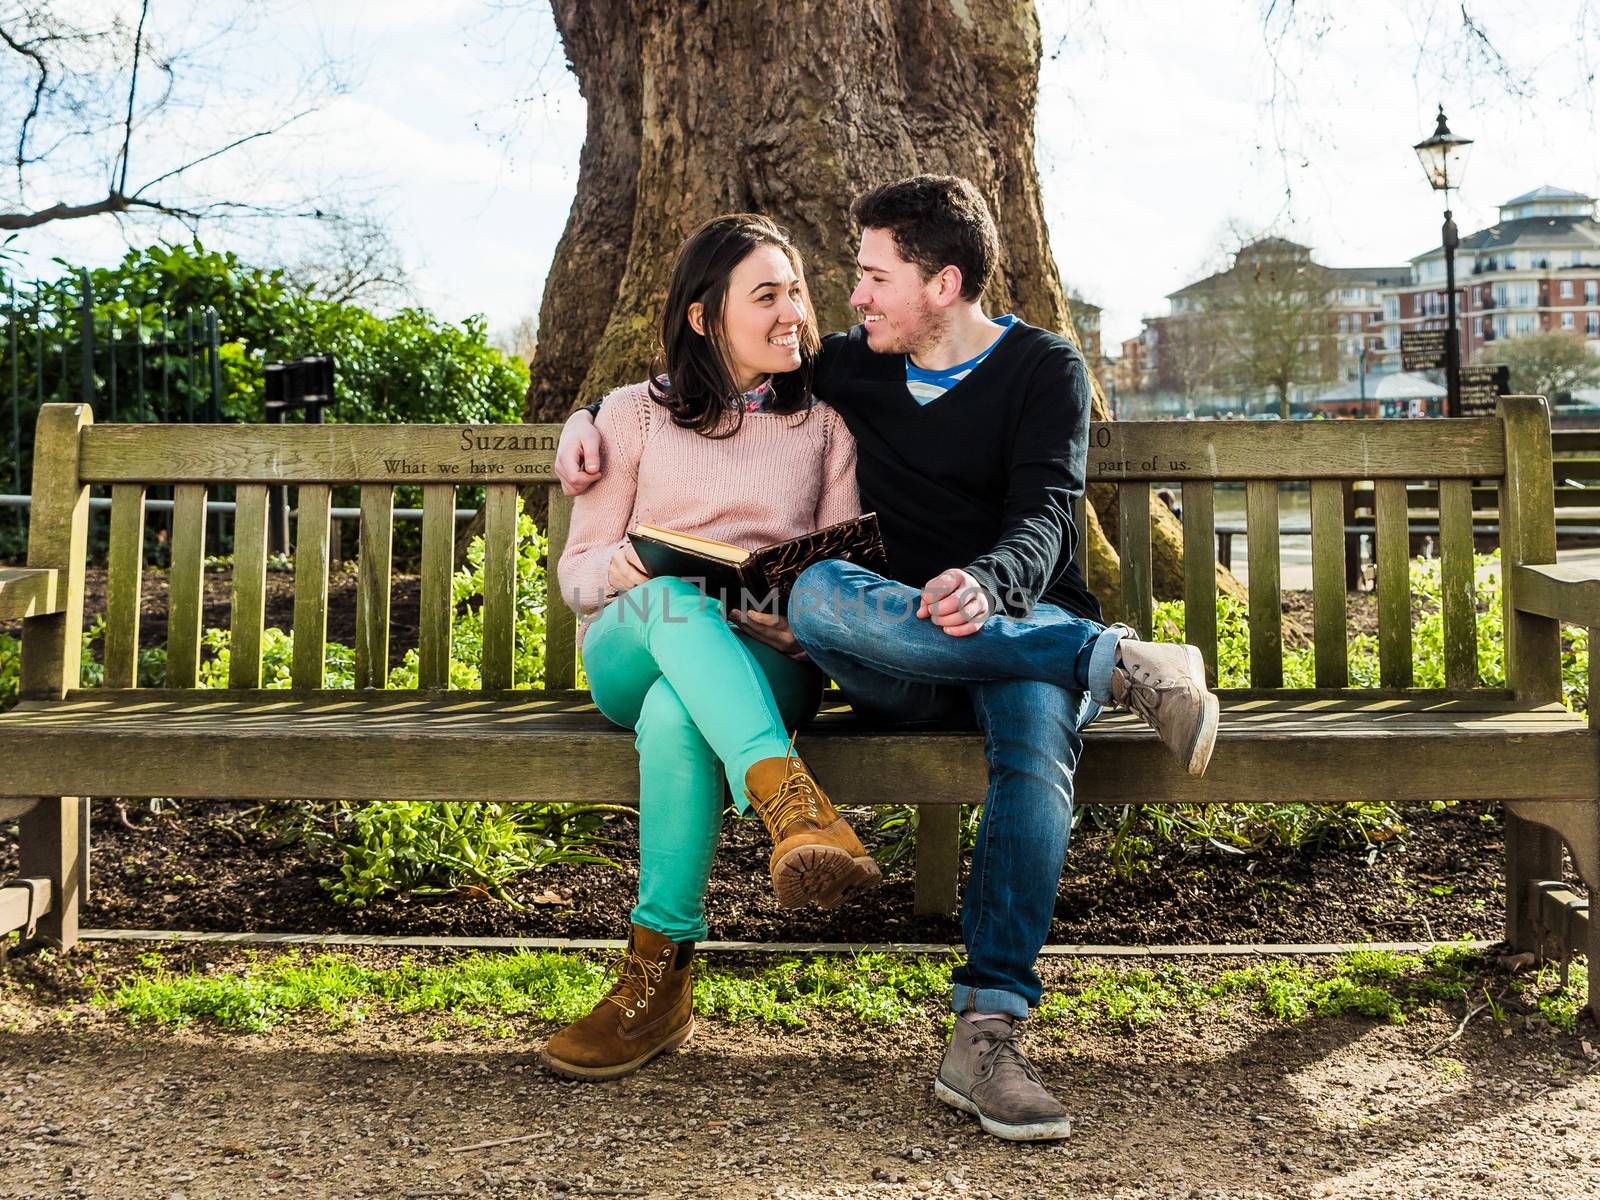 Couple in Love Hugging and Dating Sitting on a Bench in a Park Looking at Each Other